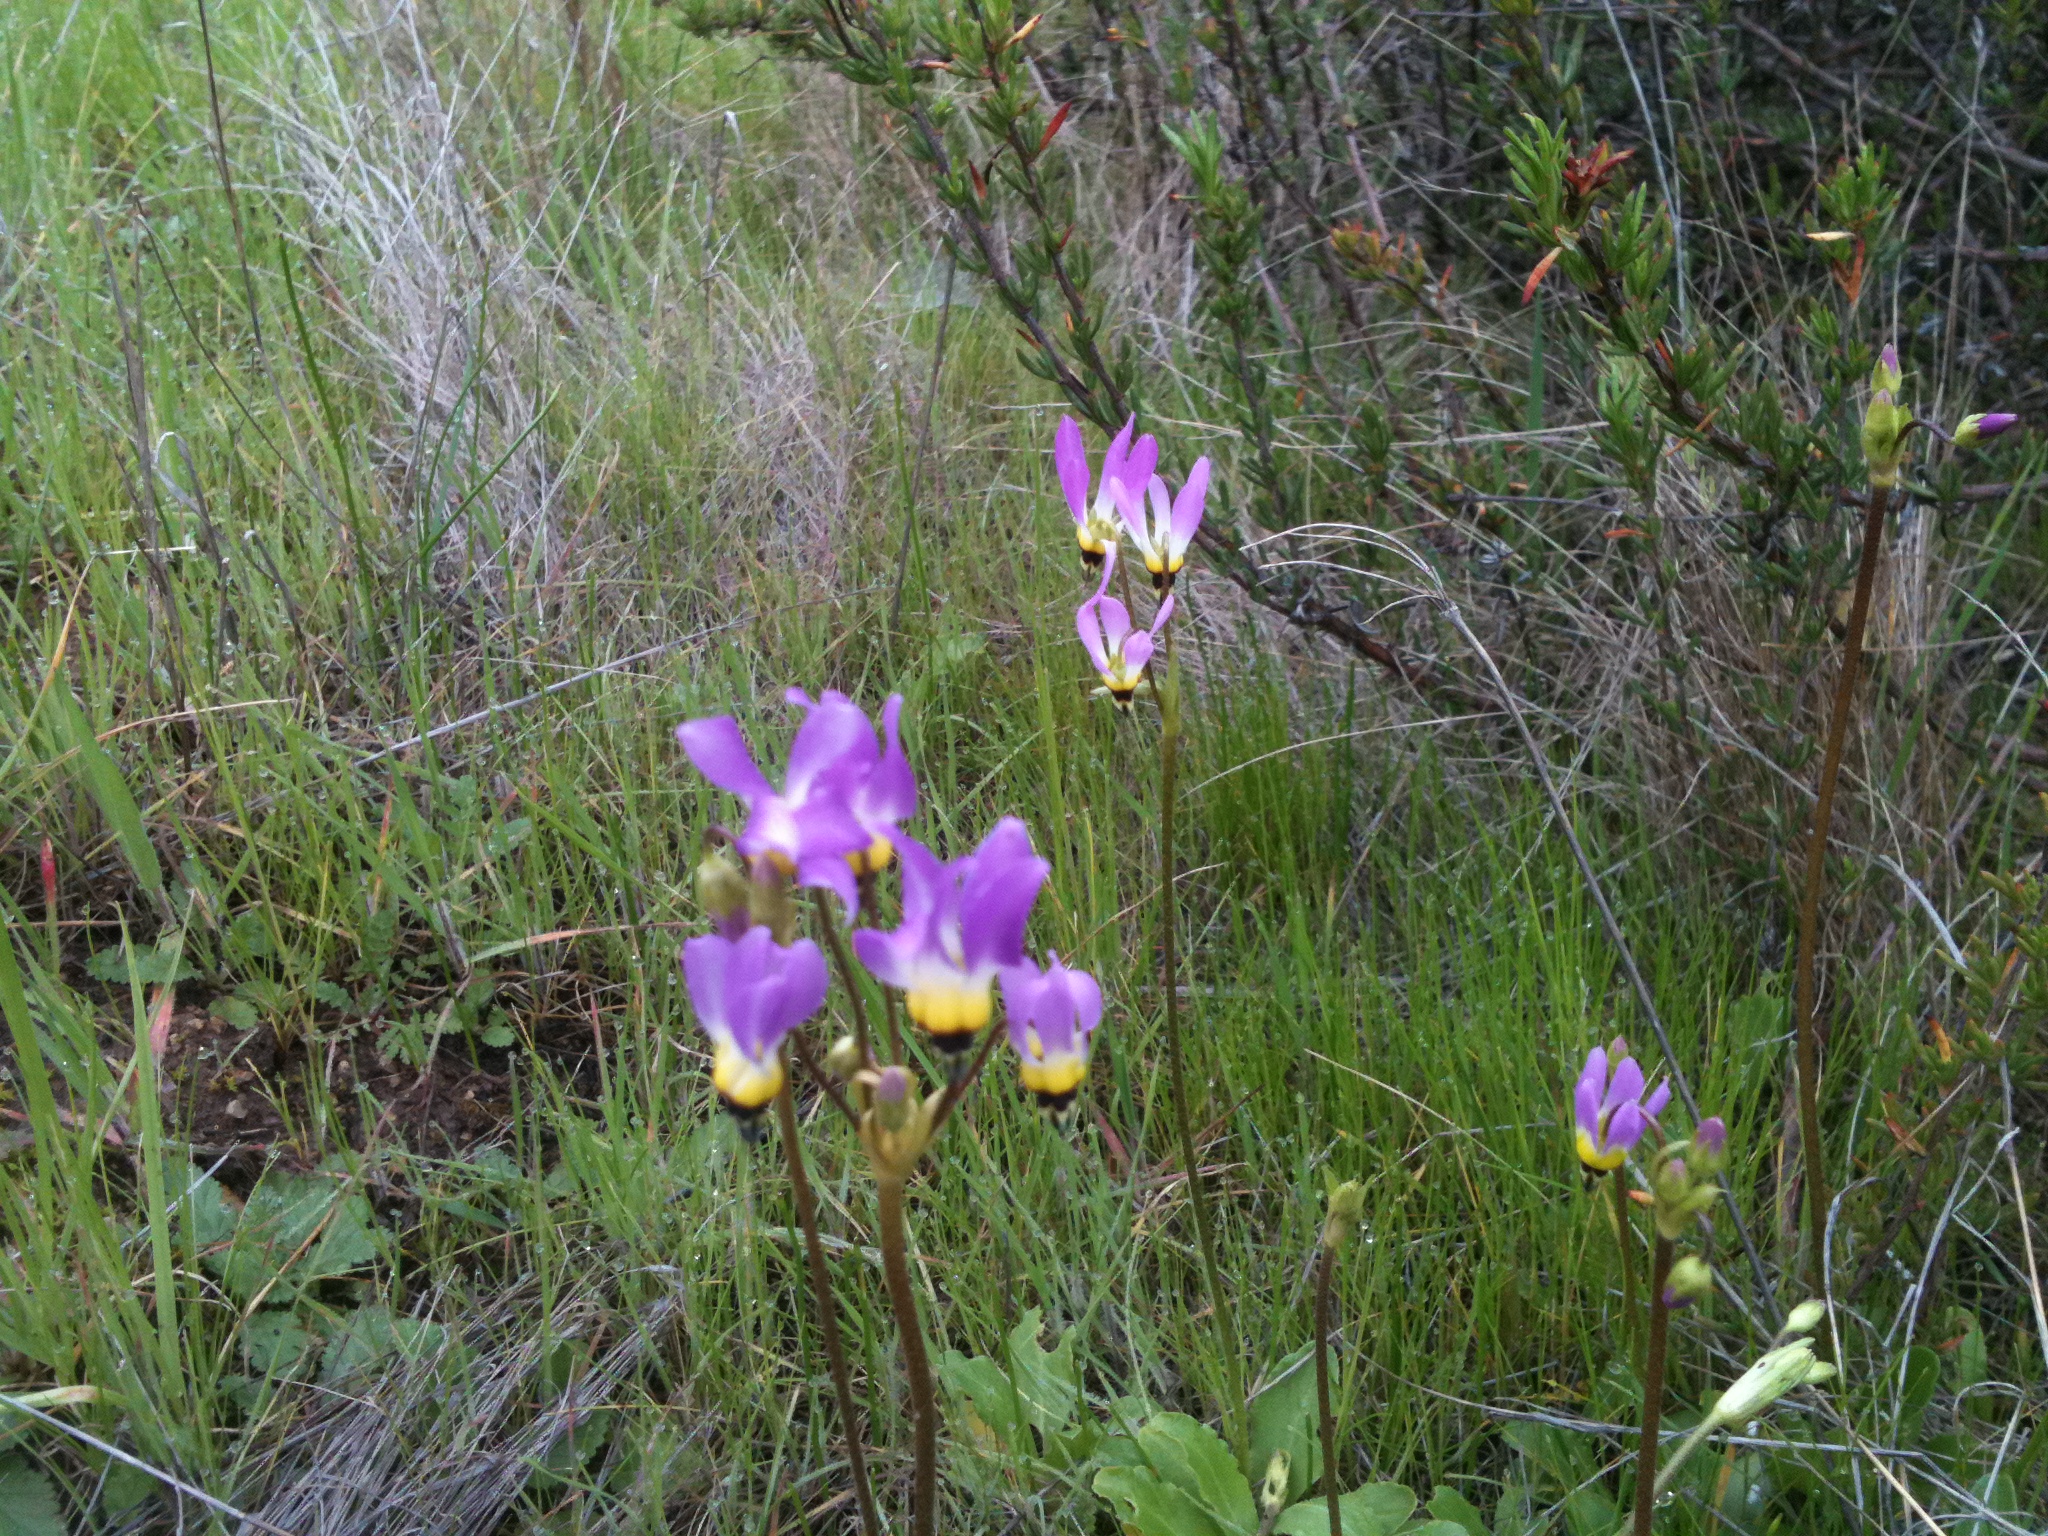 Purple and yellow flowers in front of grasses and other vegetation